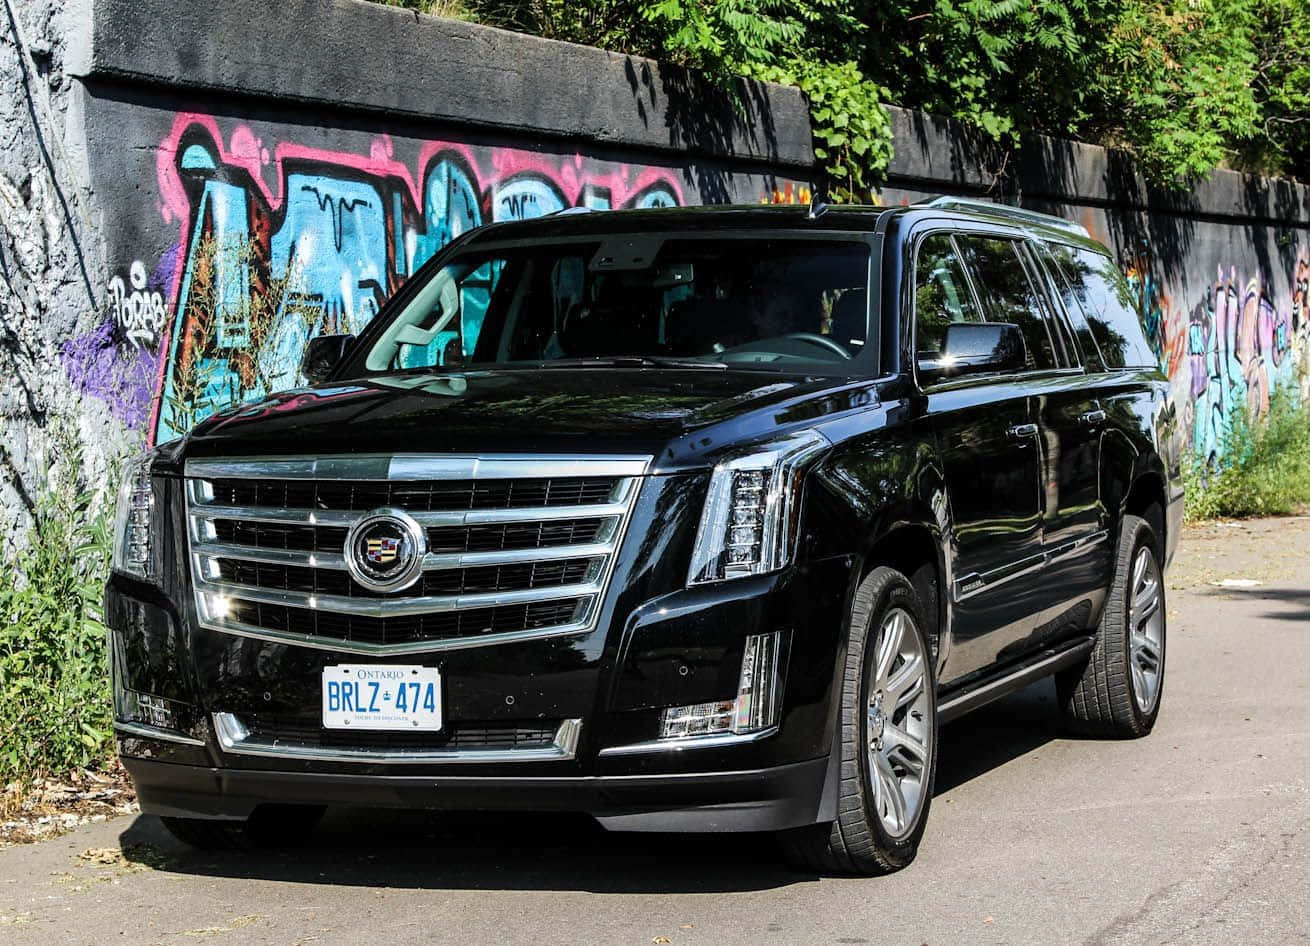 Stunning Cadillac Escalade on the road Wallpaper